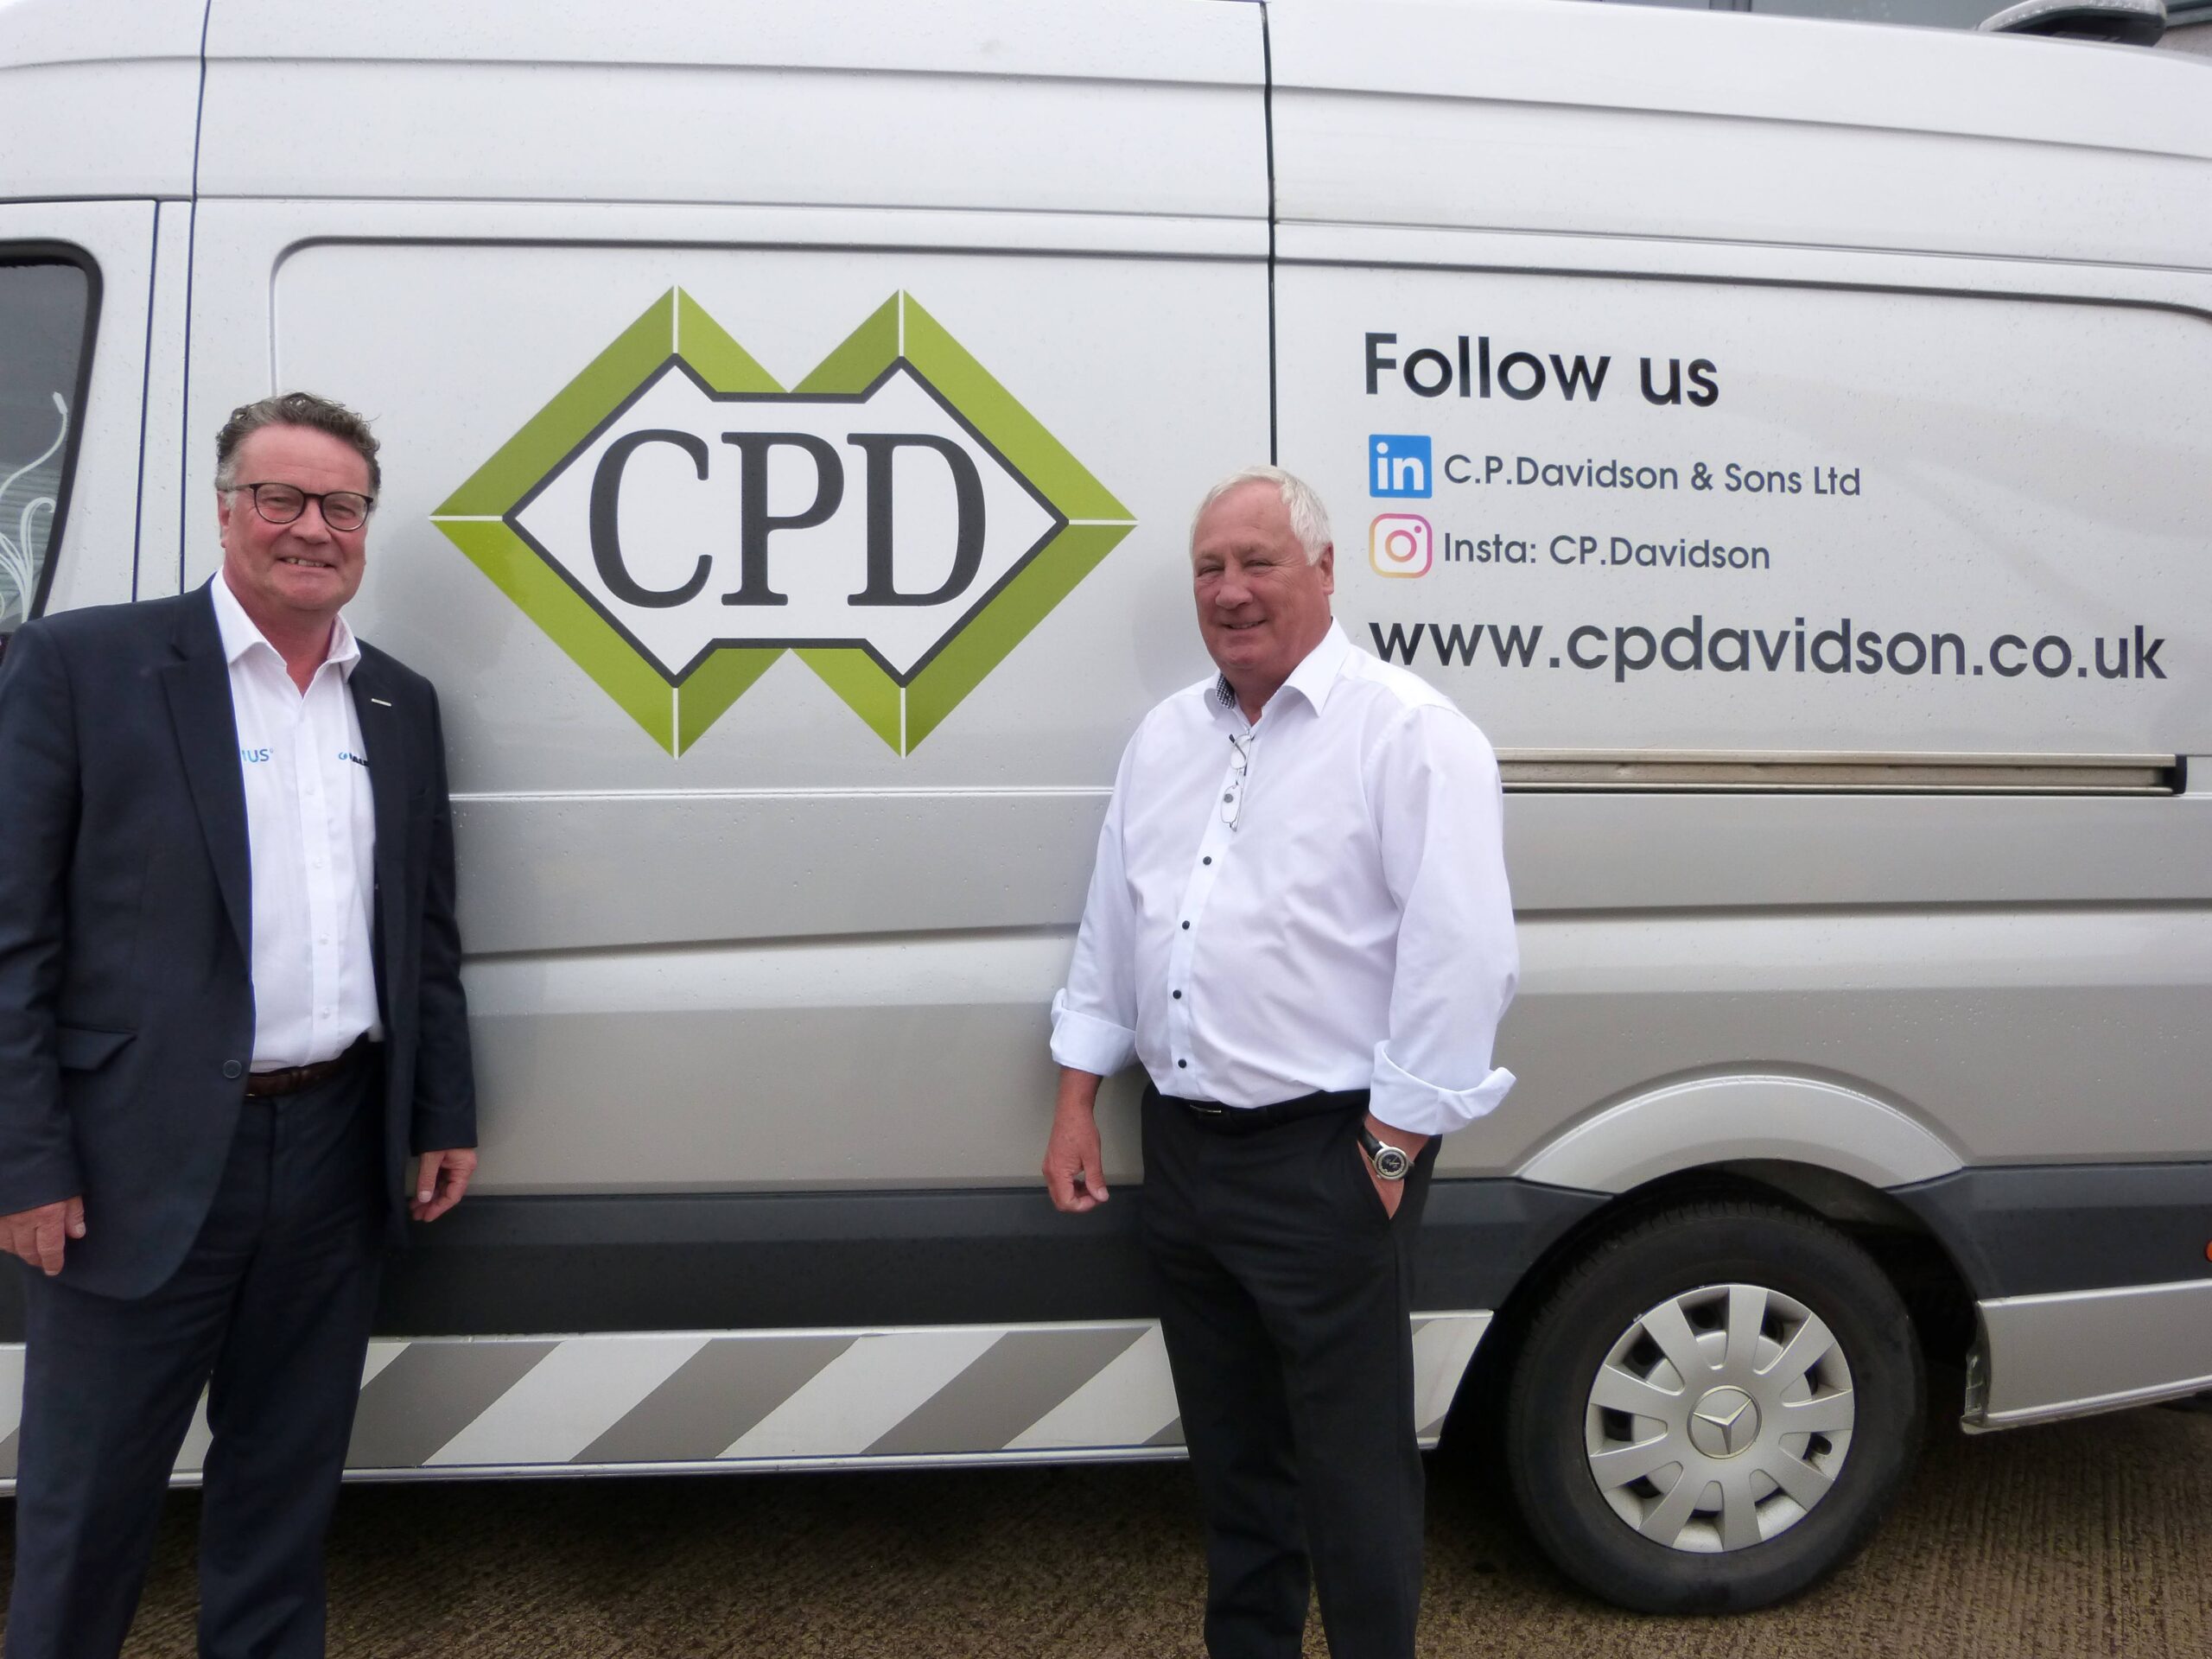 Standing in front of a white transit van, with the C.P Davidson logo and either side of the logo, is Simon standing to the left, wearing a white shirt and navy suit. And the other side standing is Philip wearing a white shirt and black trousers.